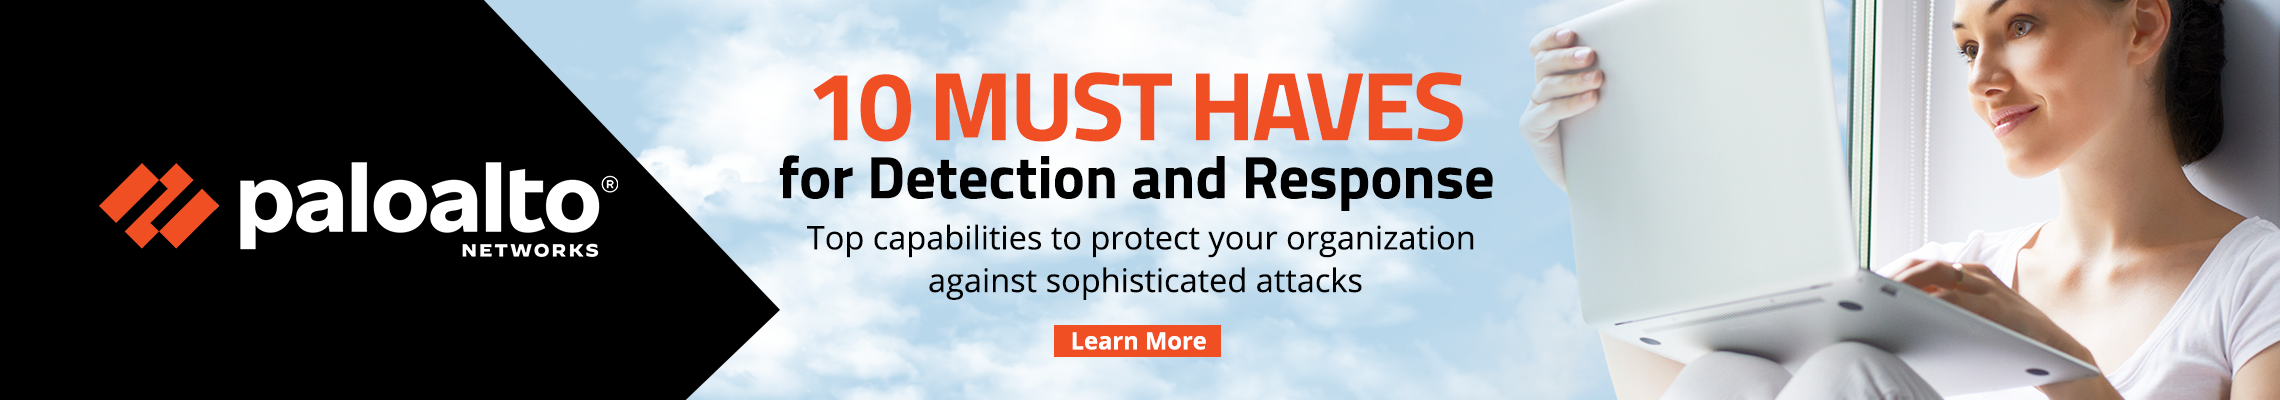 10 Must haves for Detection and Response Banner